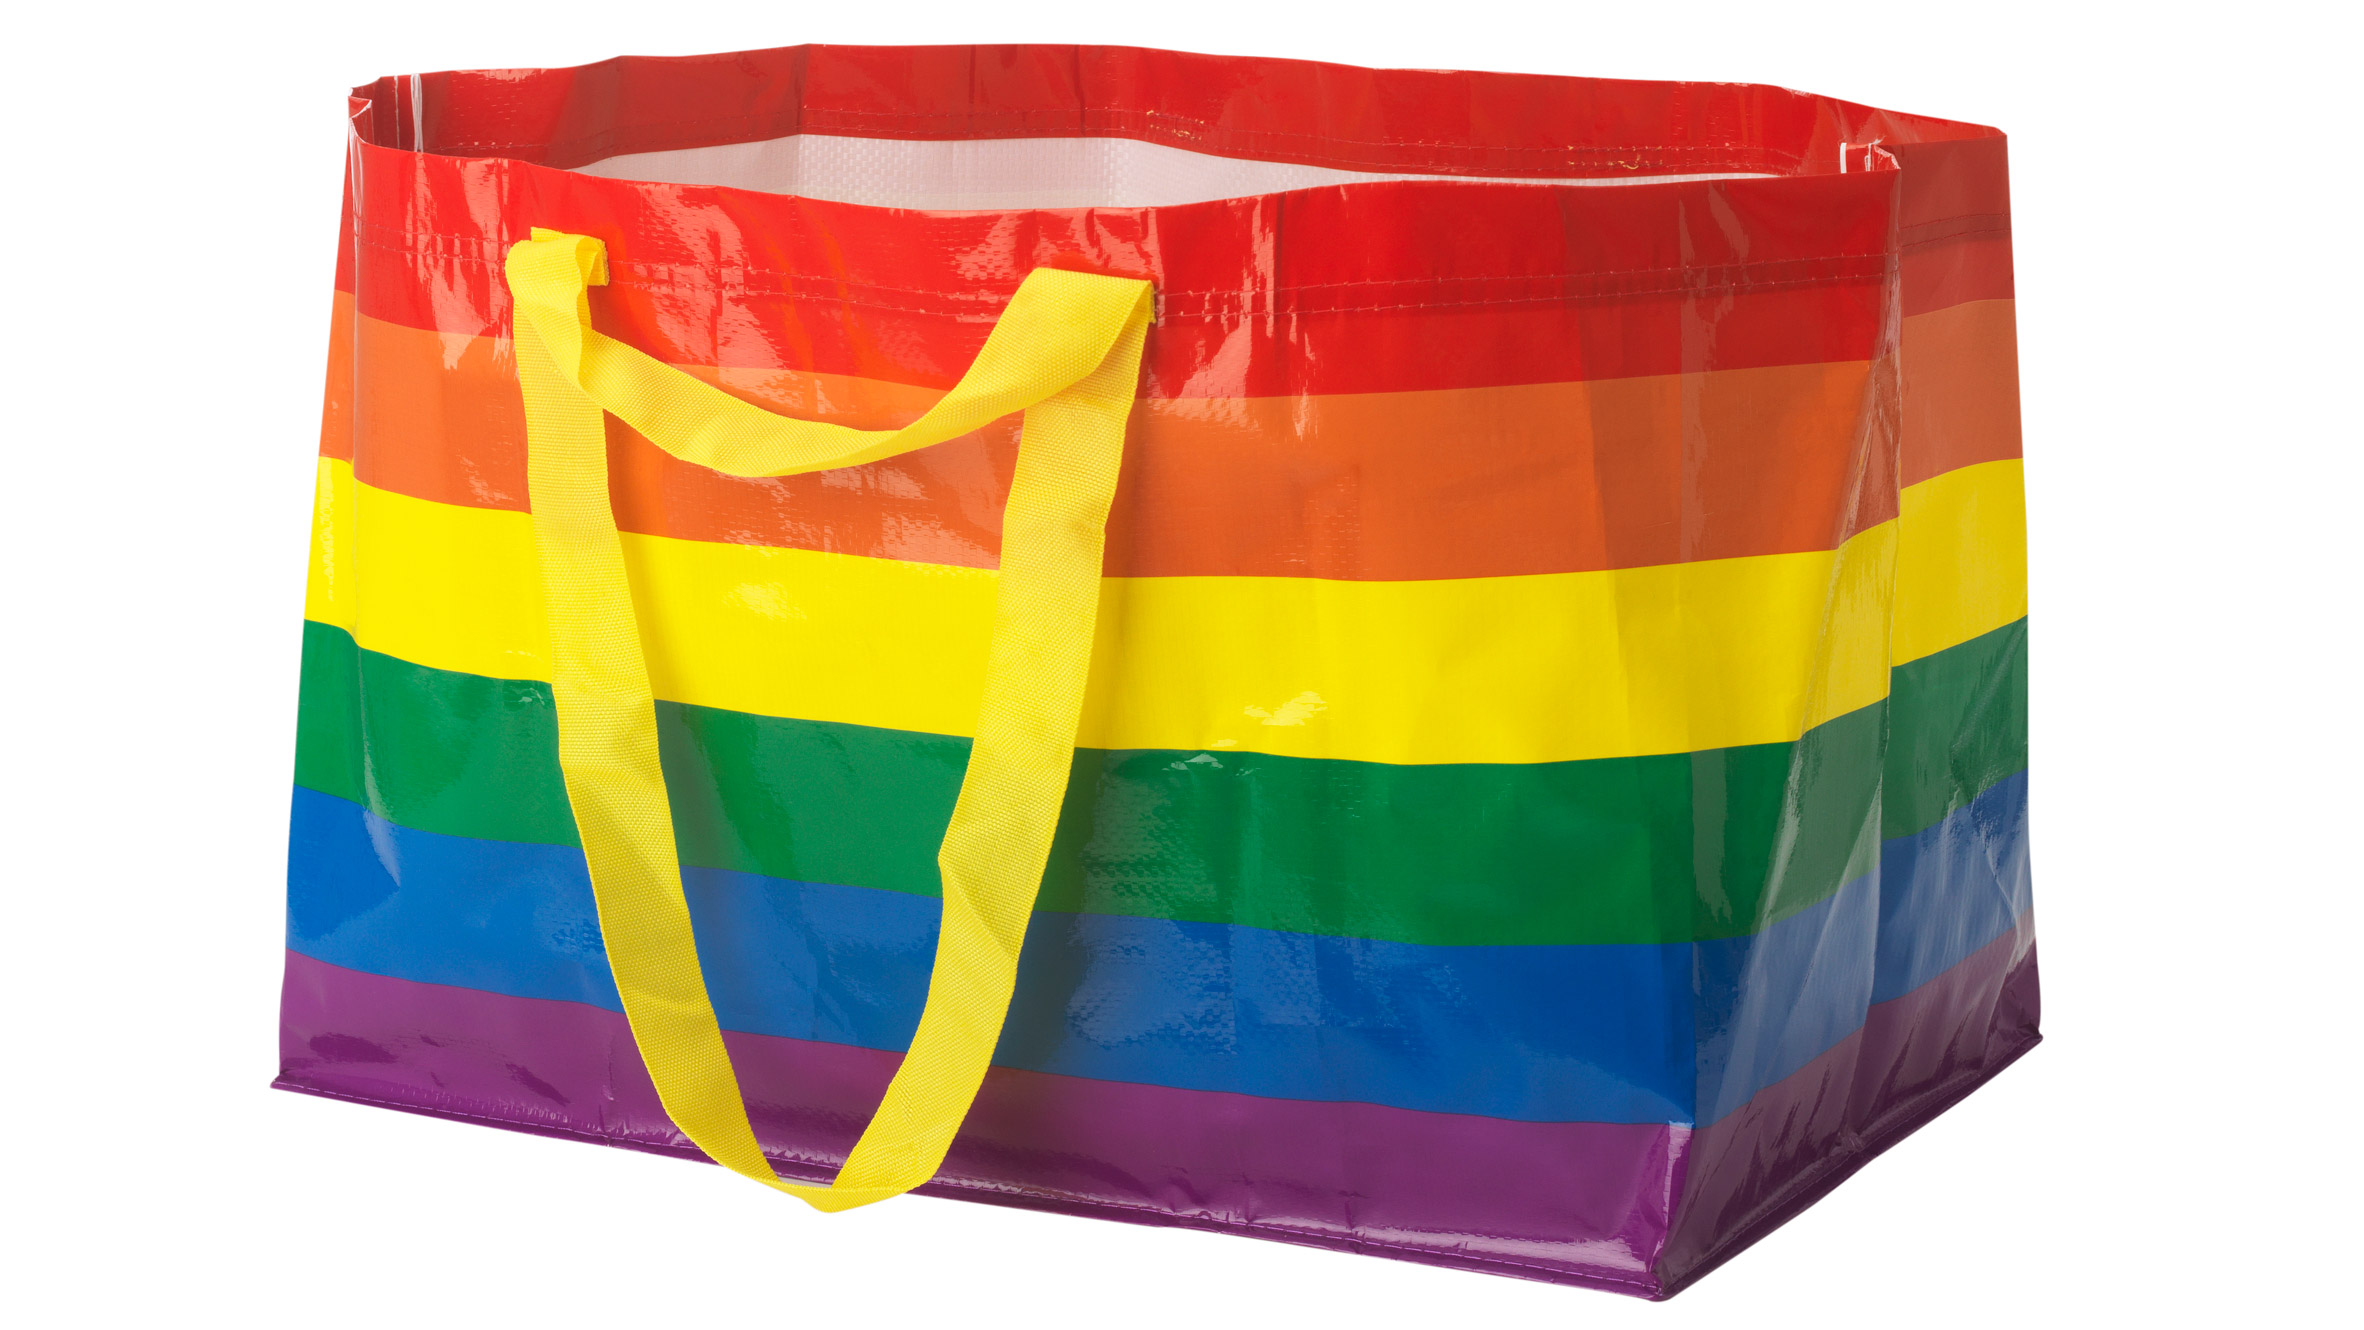 Lgbt Rainbow Canvas Bag: Show Your Pride With This Stylish